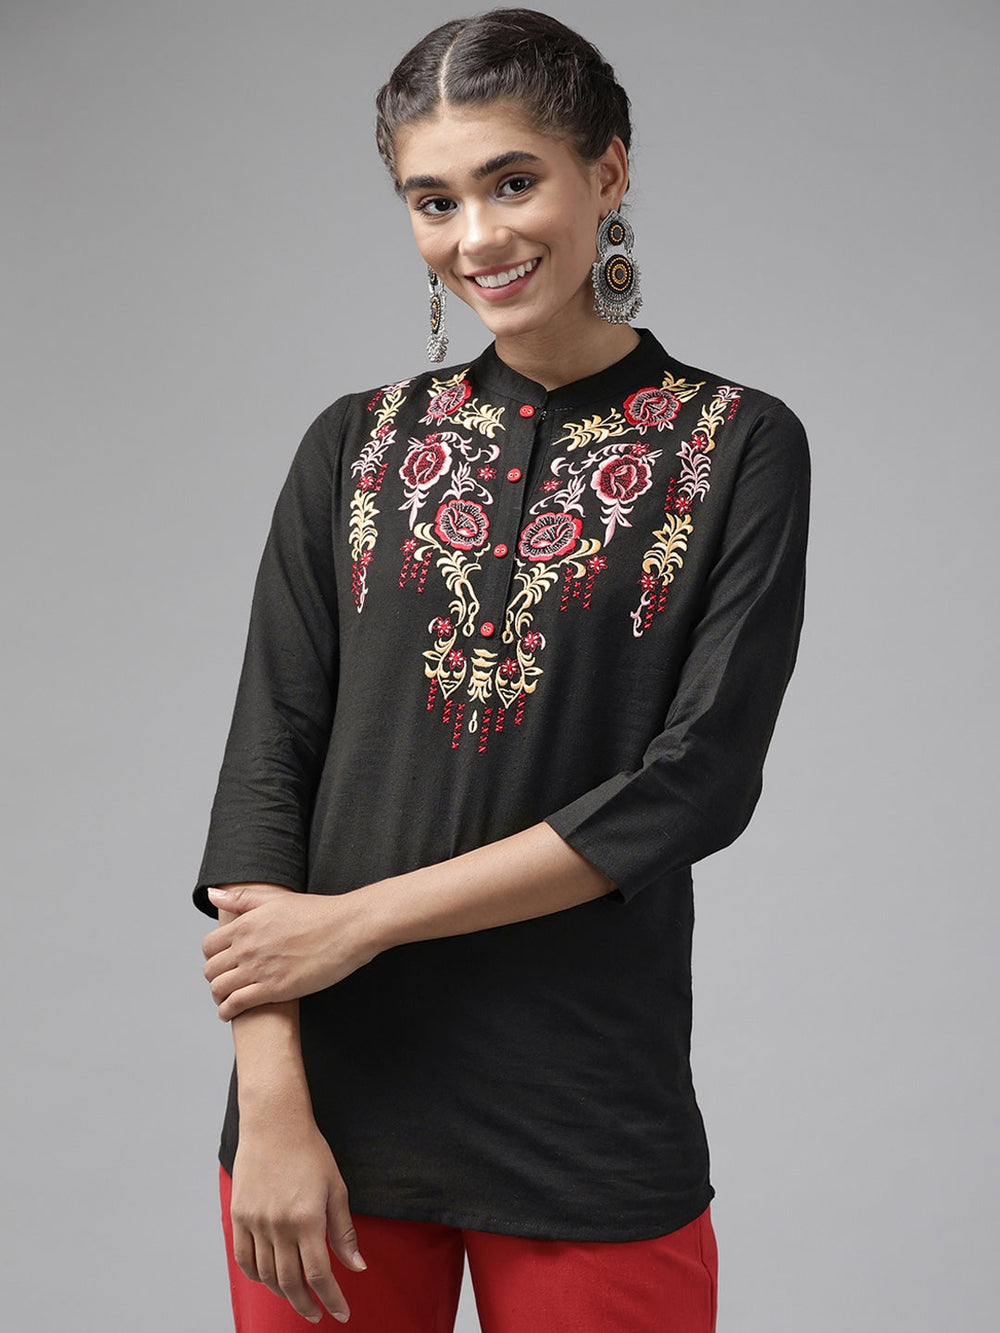 Black Floral Embroidered Top-Yufta Store-9737TOPBKS